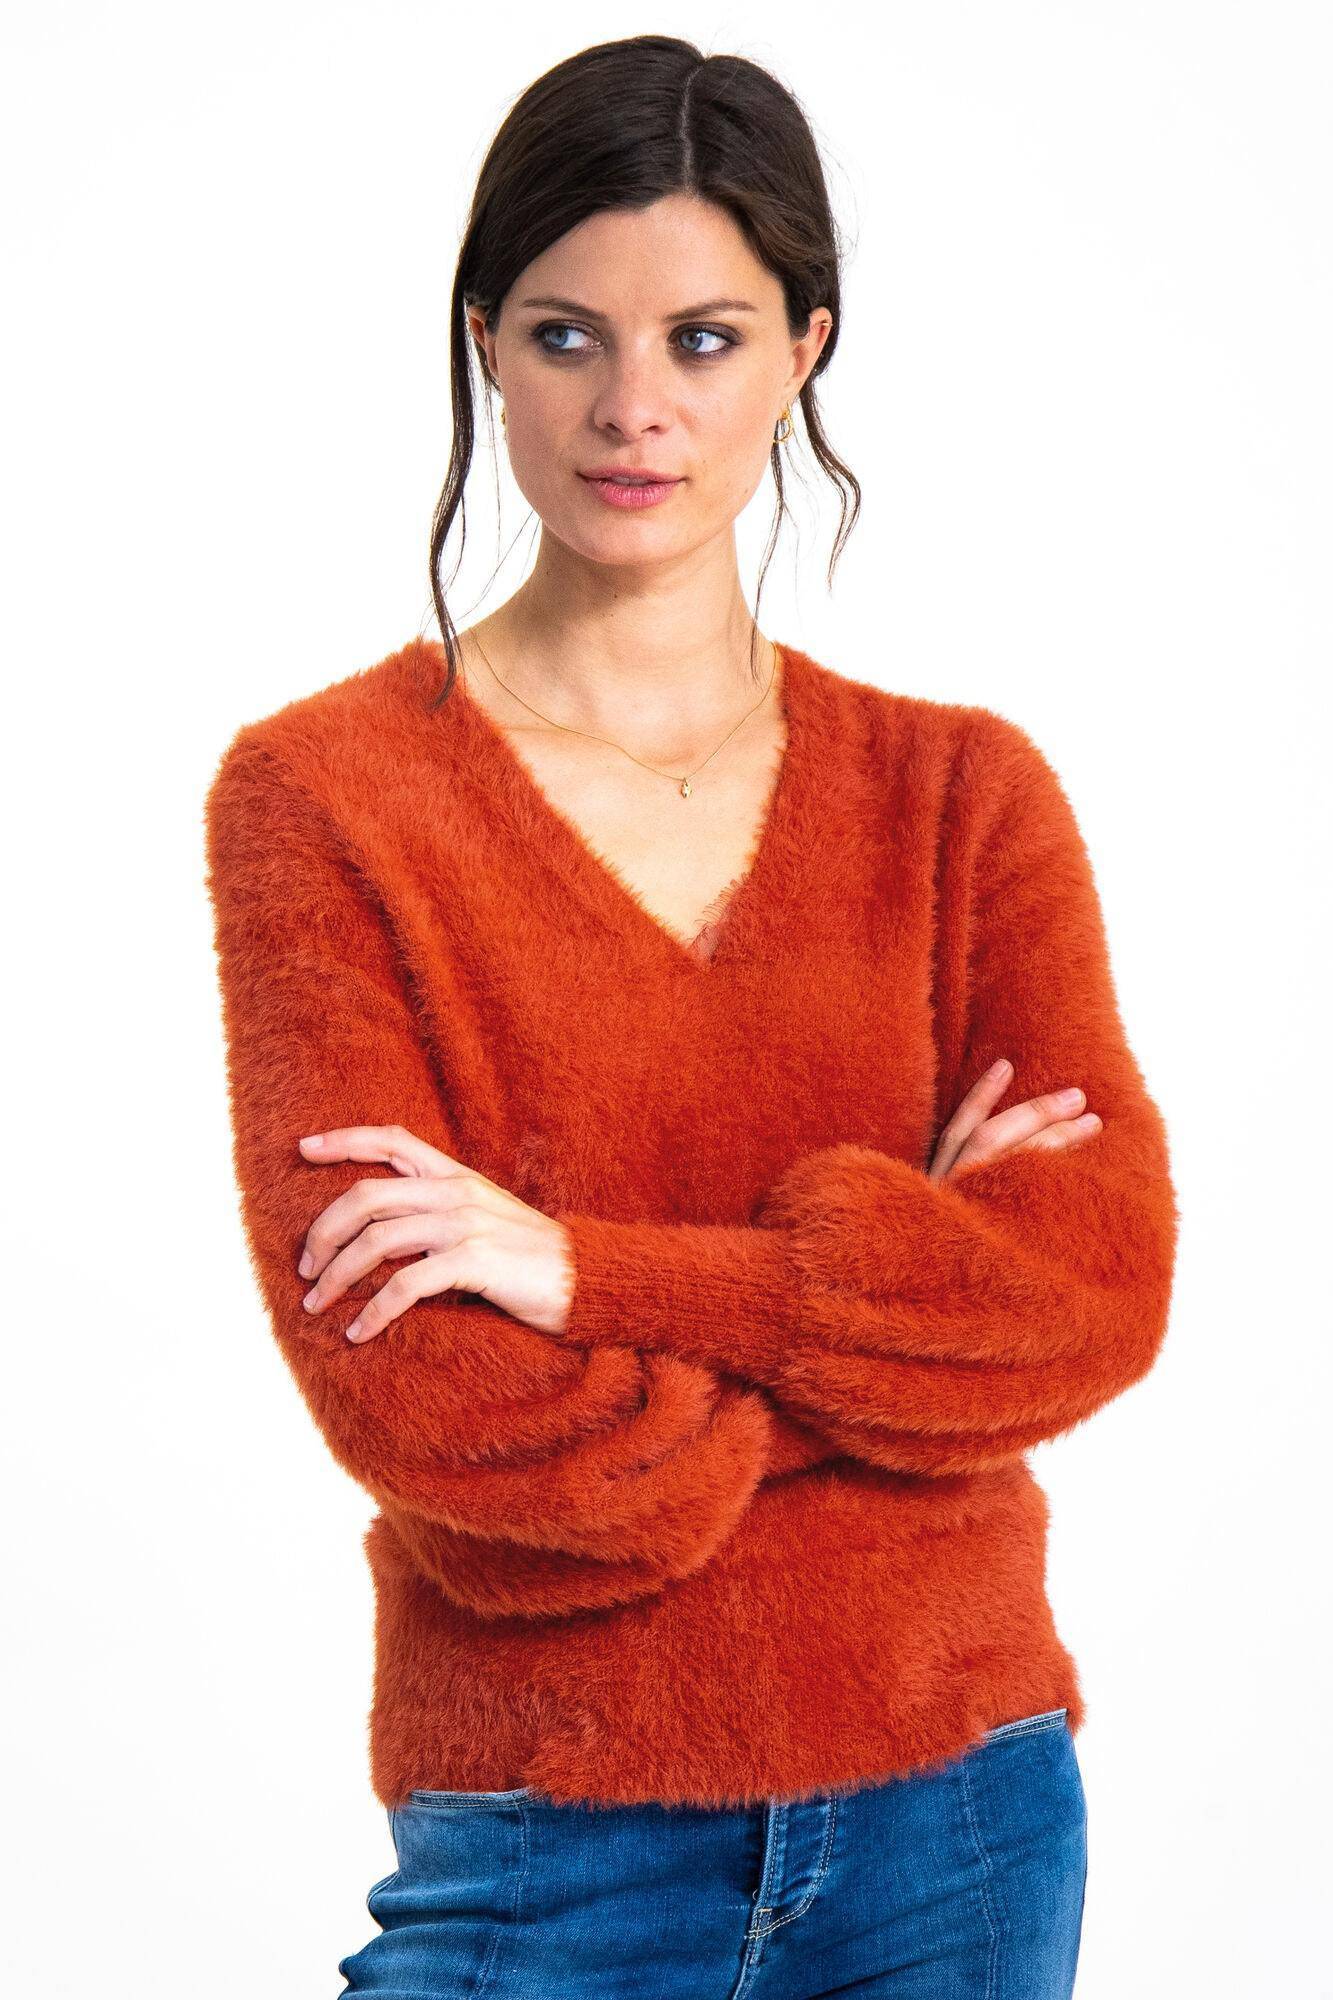 Garcia Red Fluffy Sweater - Your Style Your Story